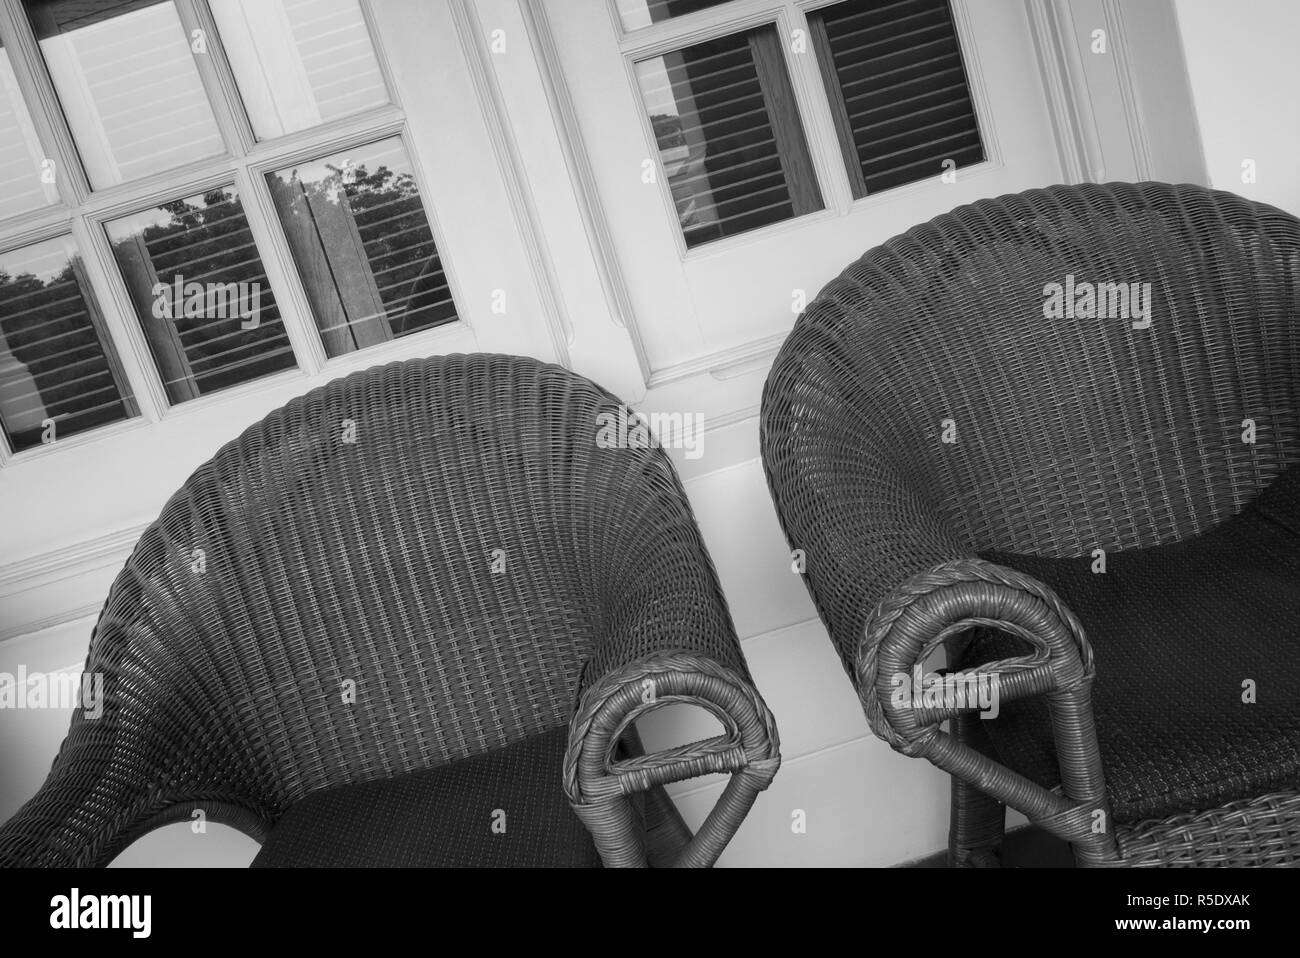 Cane chairs at Raffles Hotel, Singapore Stock Photo